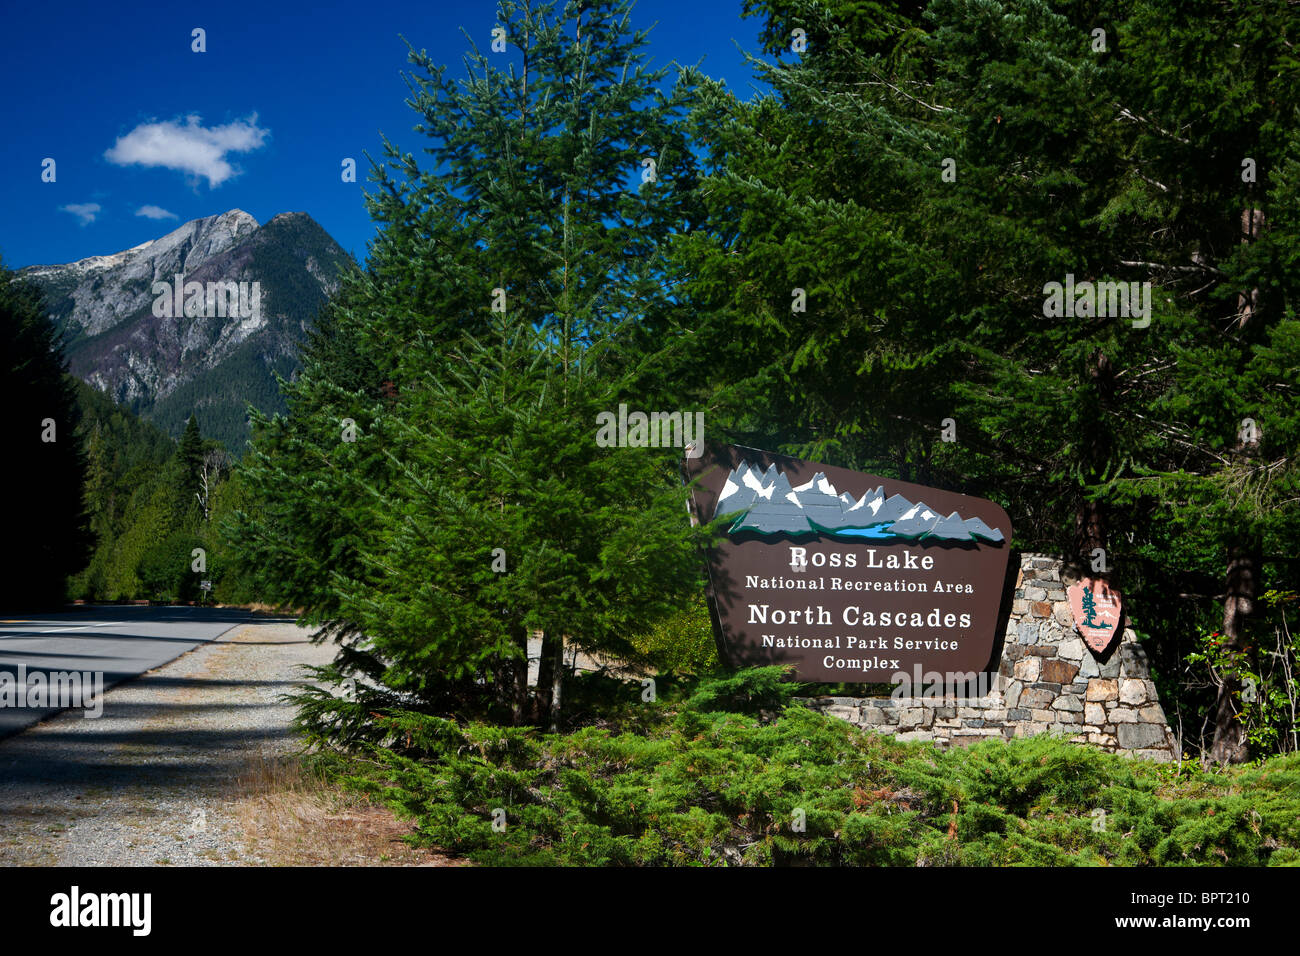 Ross Lake National Recreation Area and North Cascades National Park Service Complex welcome sign, Washington Stock Photo